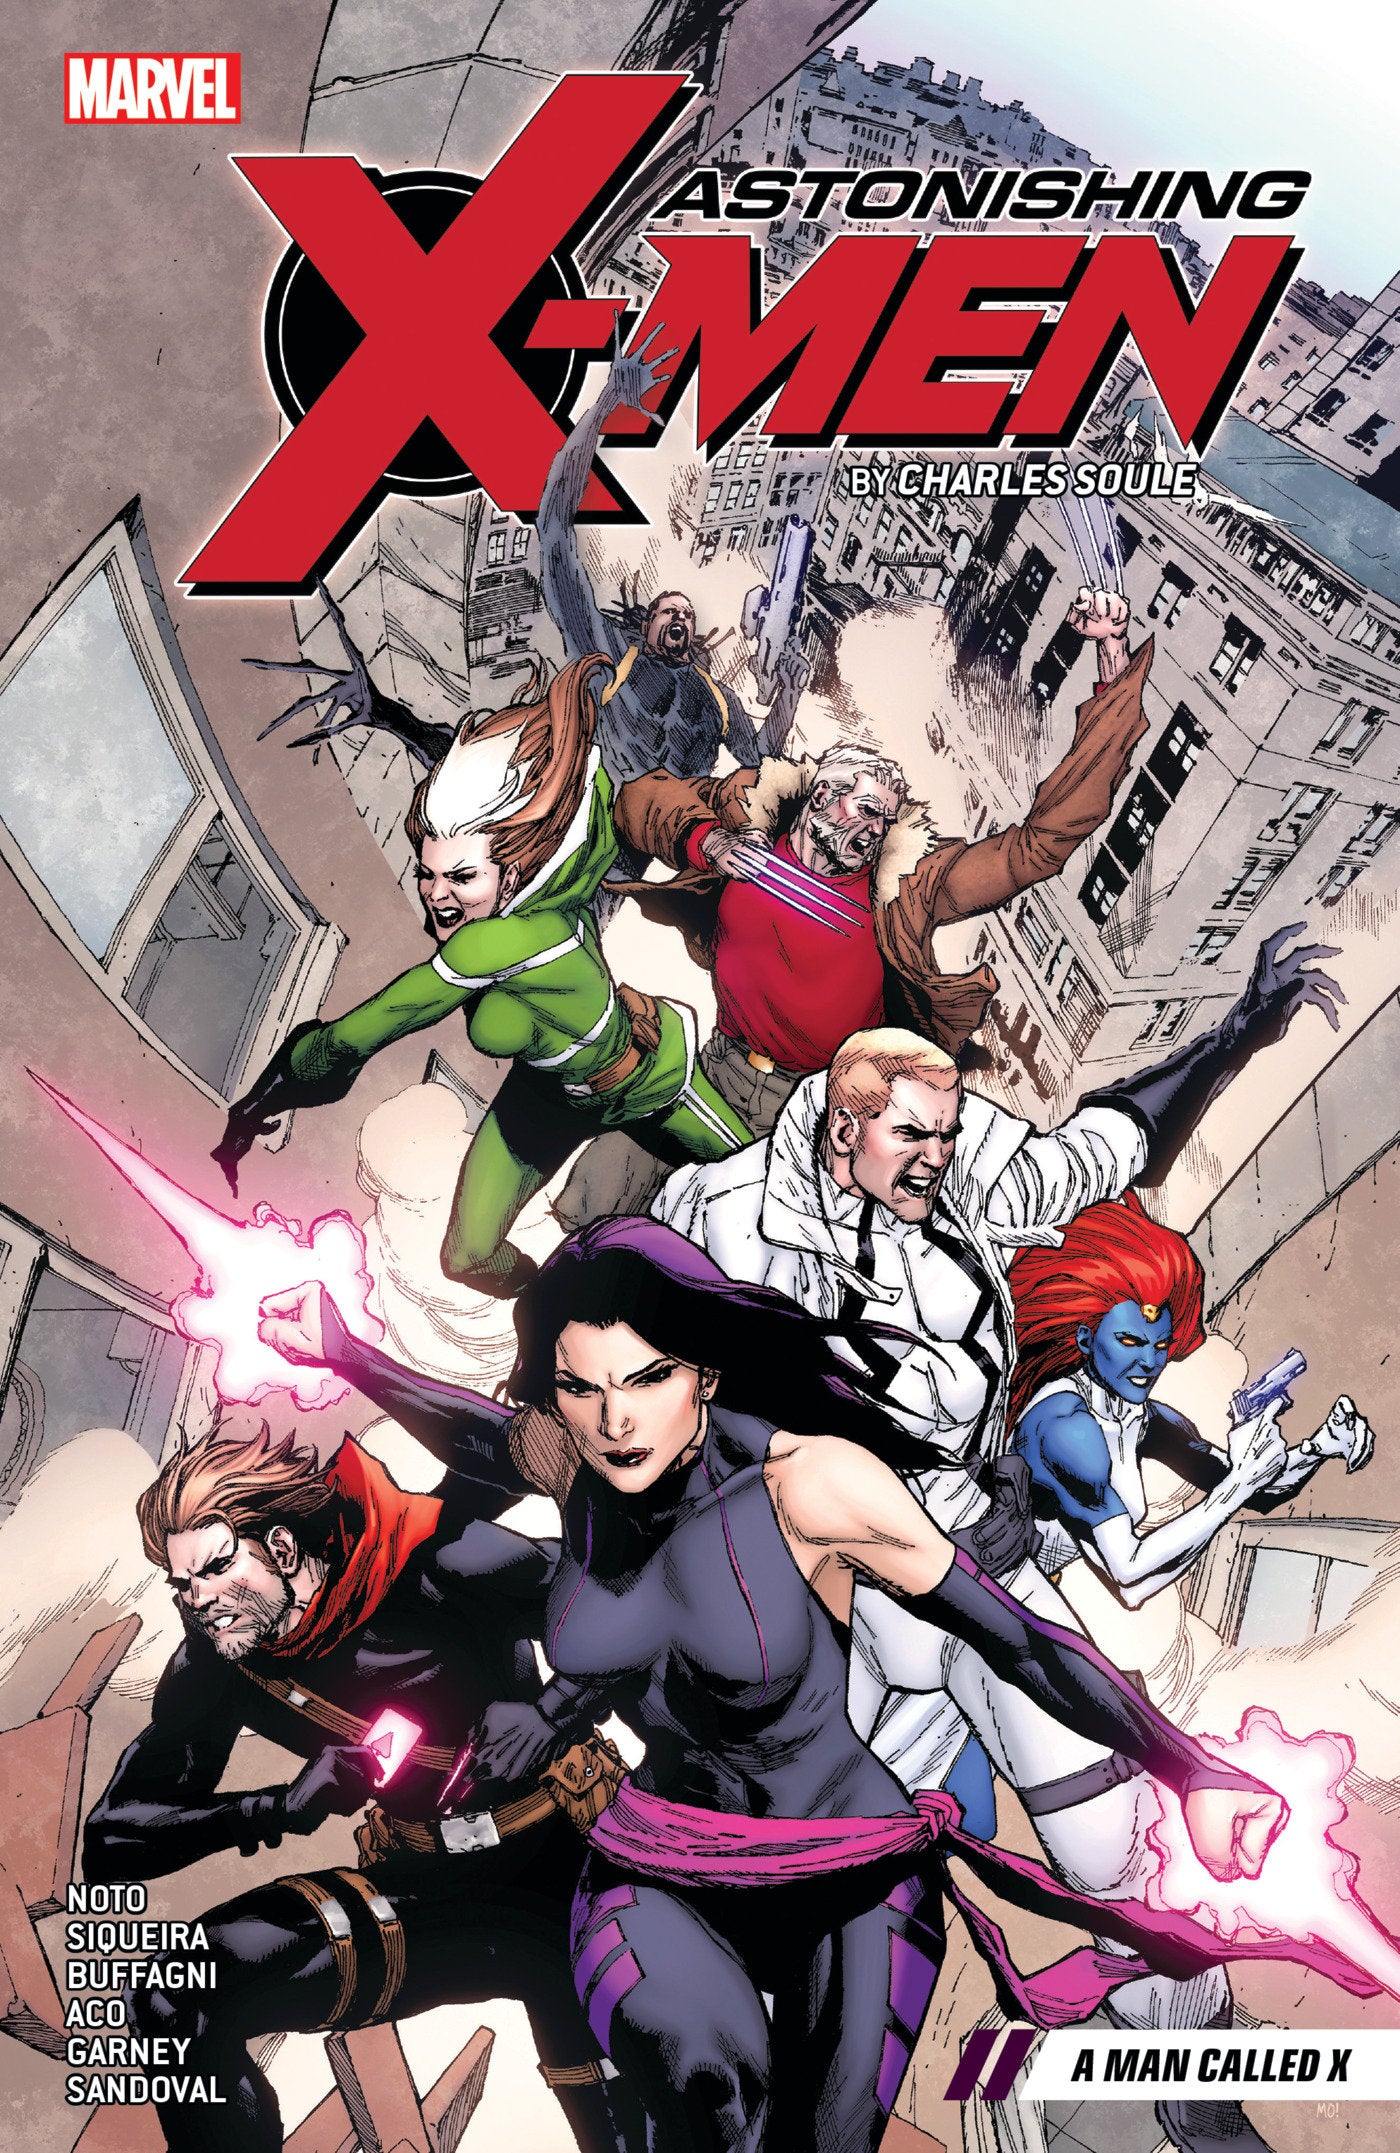 ASTONISHING X-MEN BY CHARLES SOULE VOL. 2: A MAN CALLED X TRADE PAPERBACK